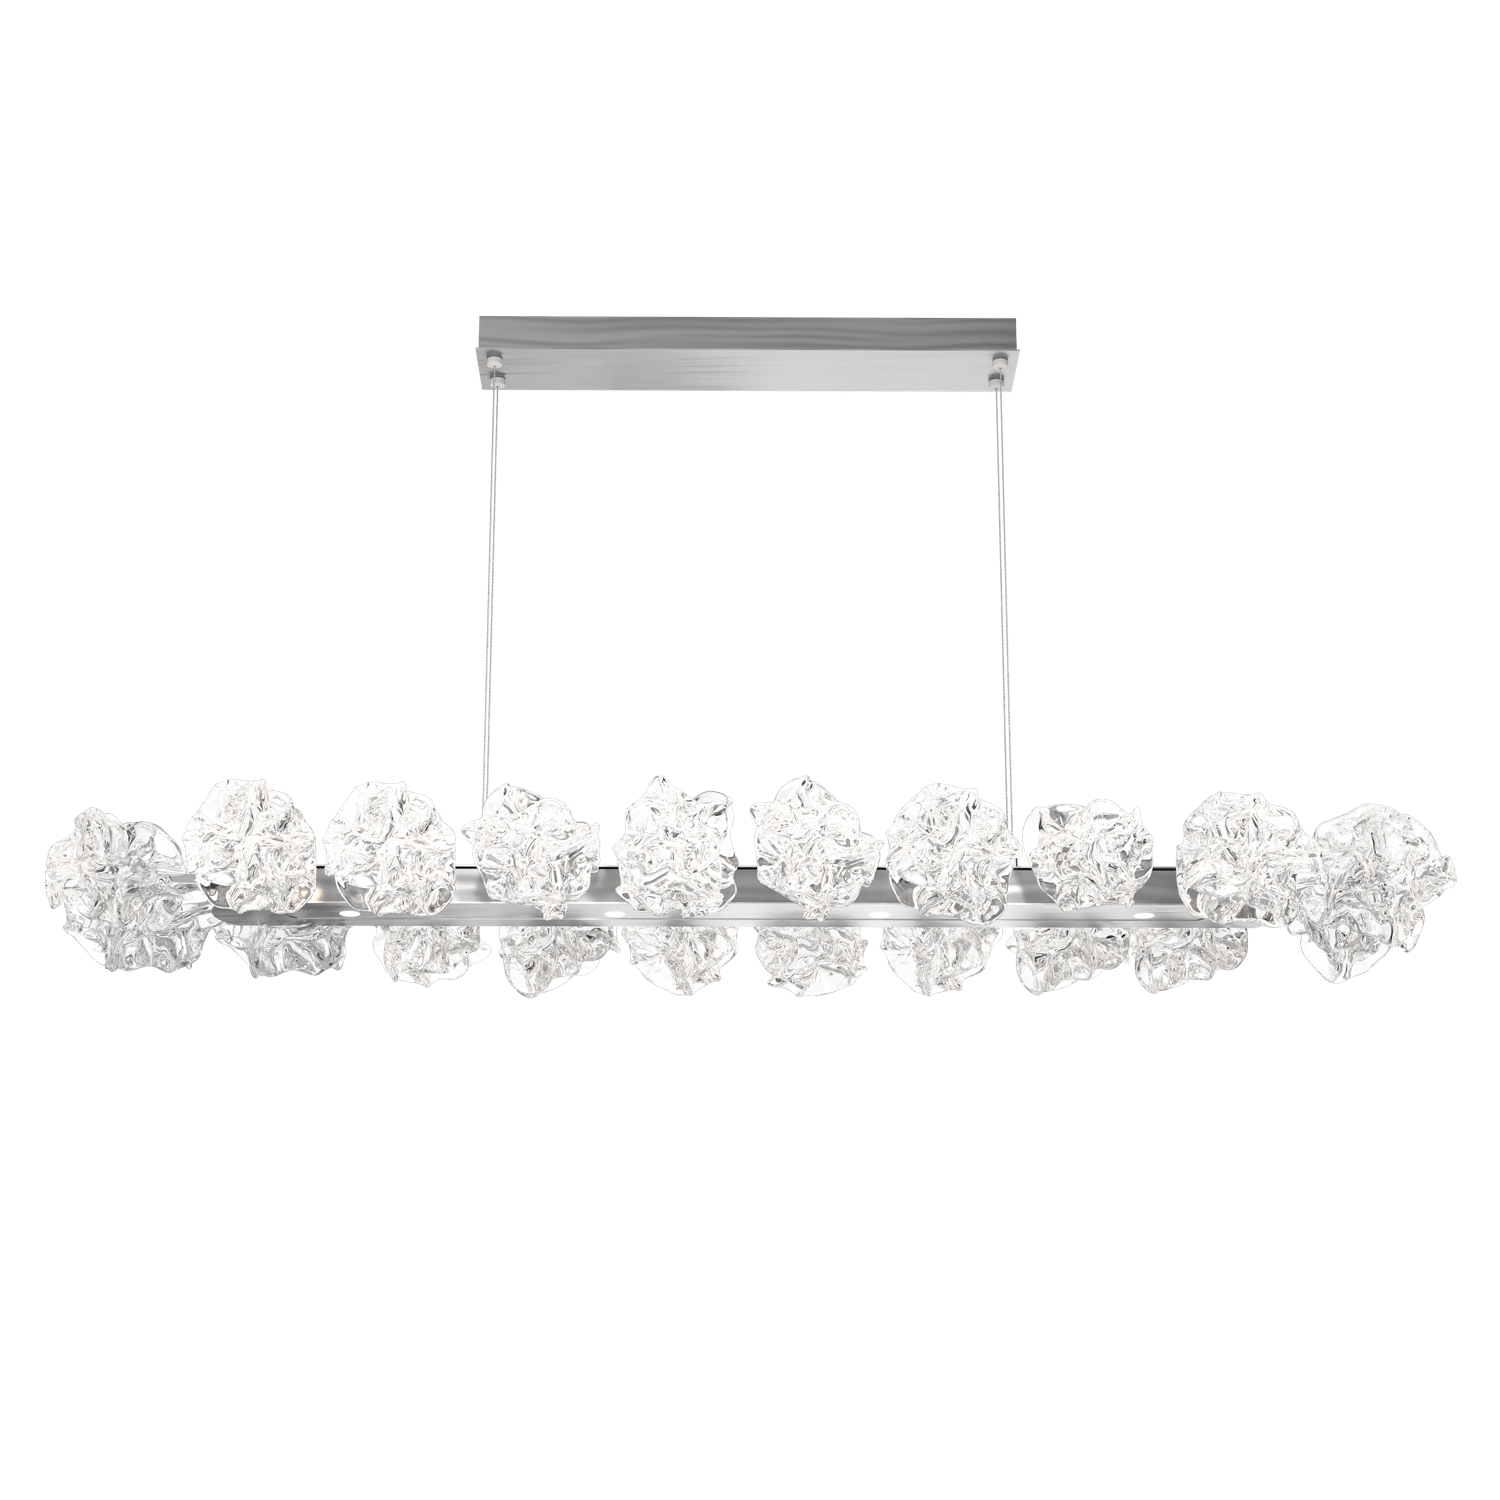 PLB0059-60-SN-Hammerton-Studio-Blossom-60-inch-linear-chandelier-with-satin-nickel-finish-and-clear-handblown-crystal-glass-shades-and-LED-lamping